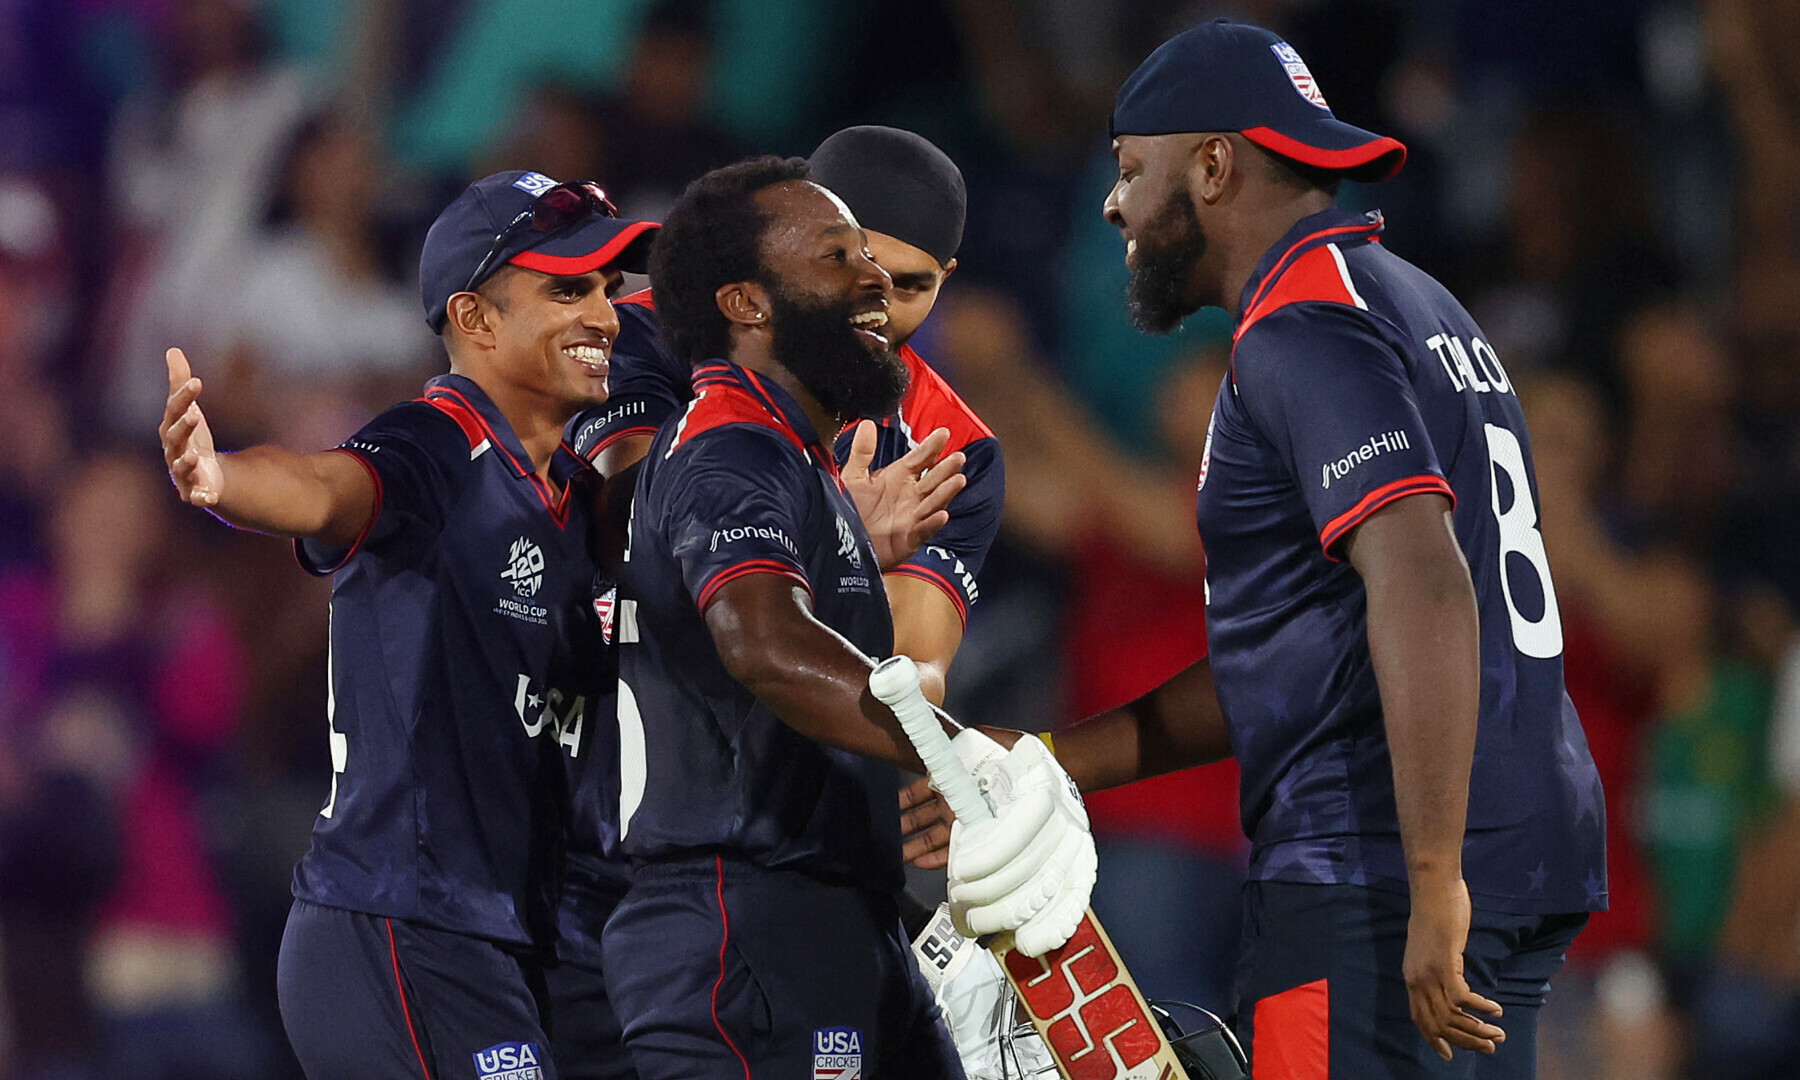 USA rocketed past Canada in the T20 World Cup opener.